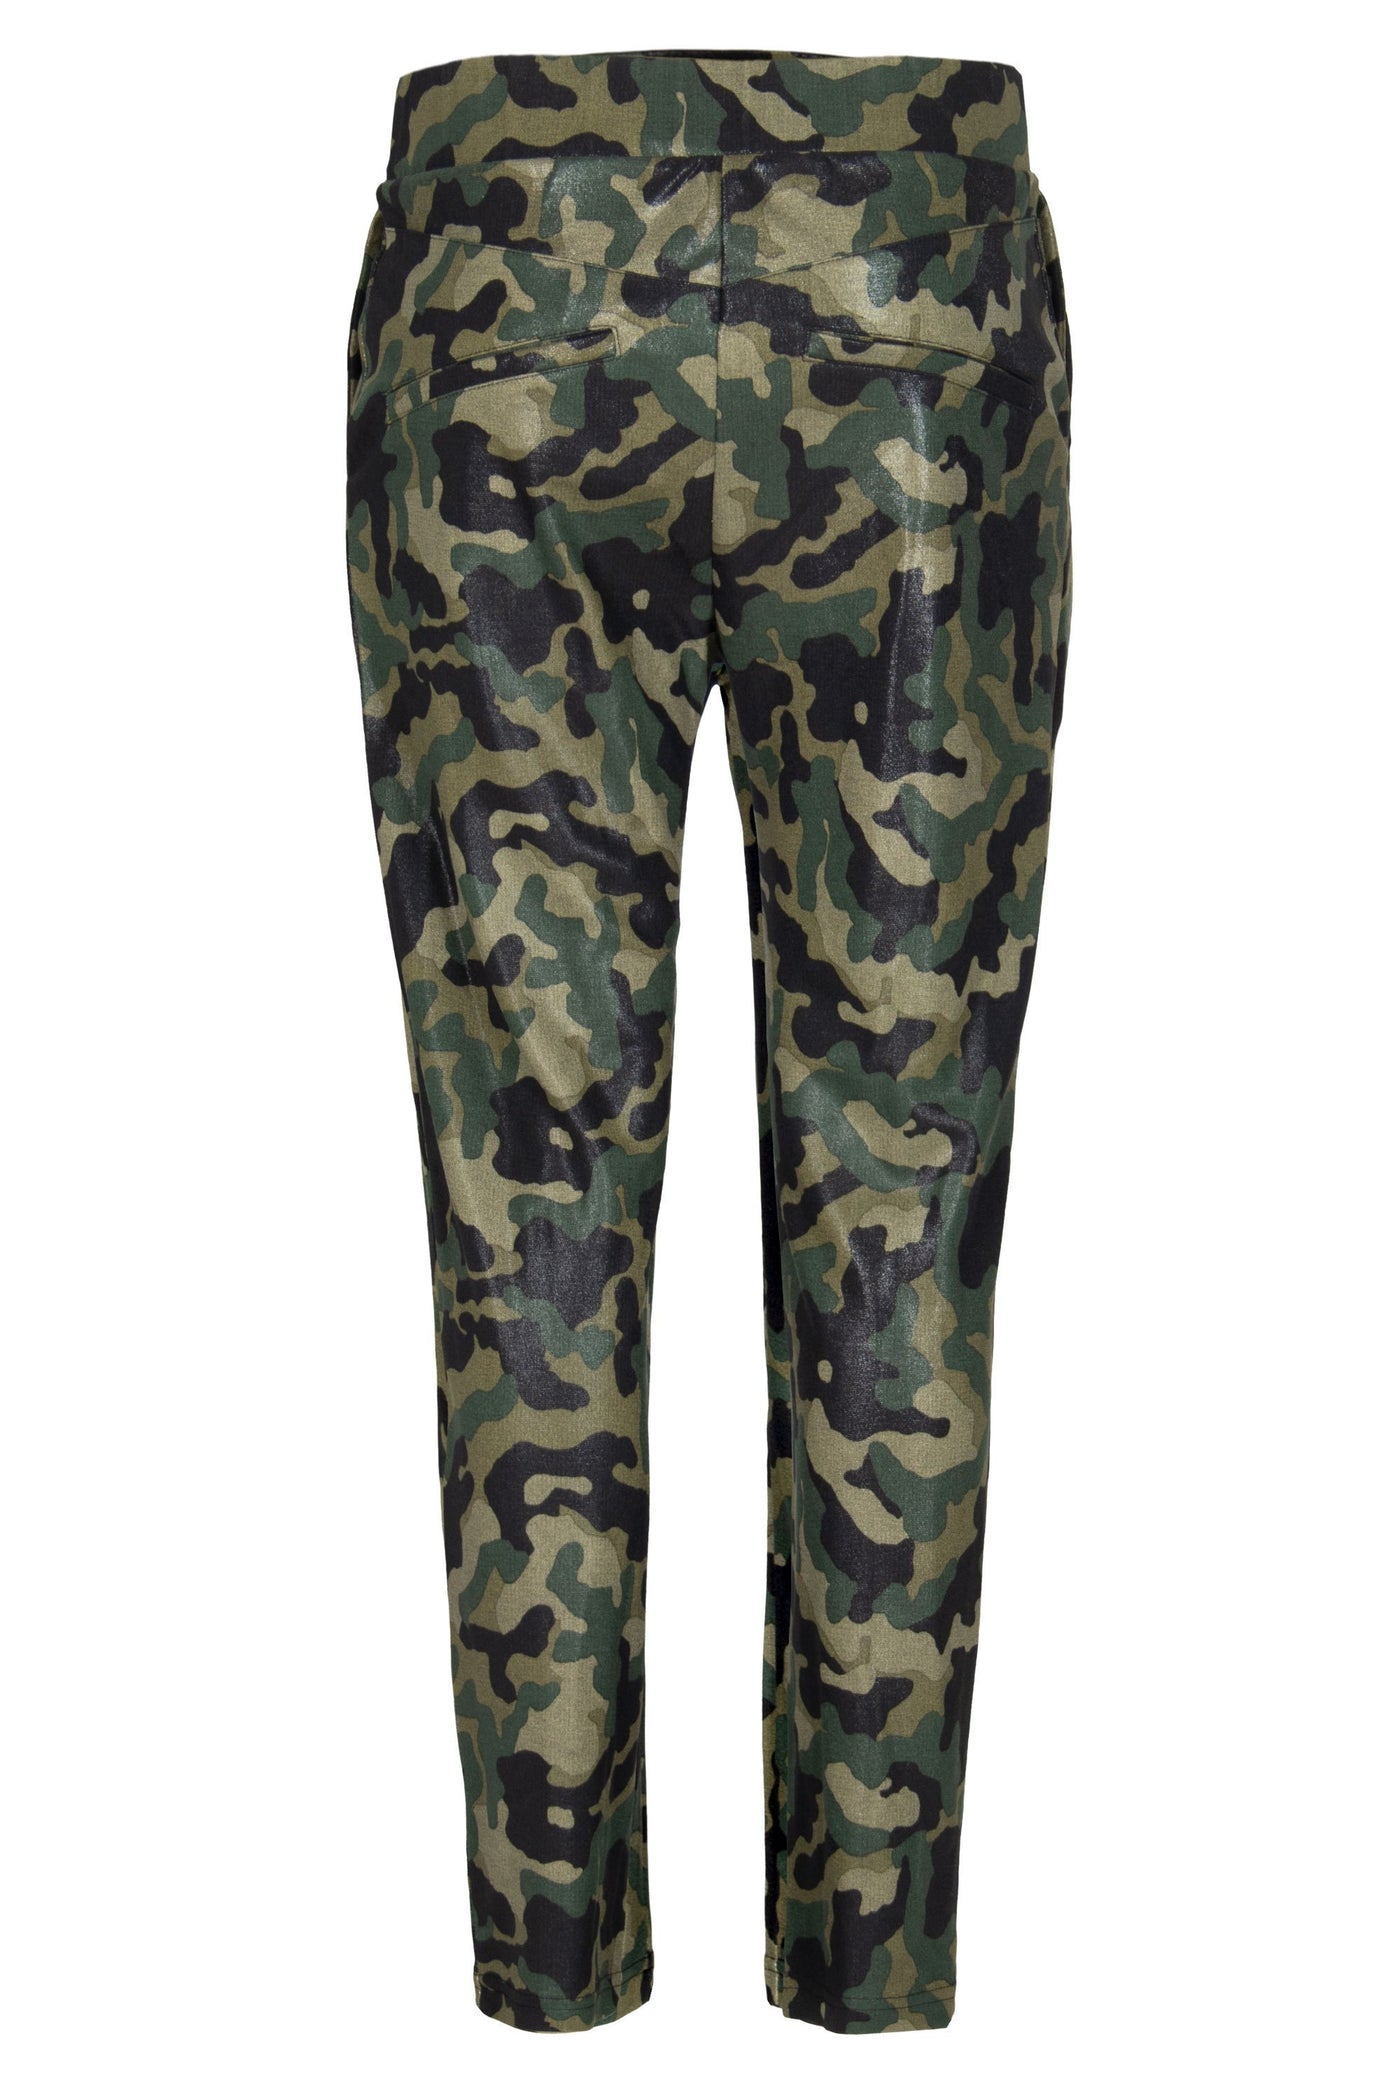 chassca shiny Camouflage printed design pant - Breakmood